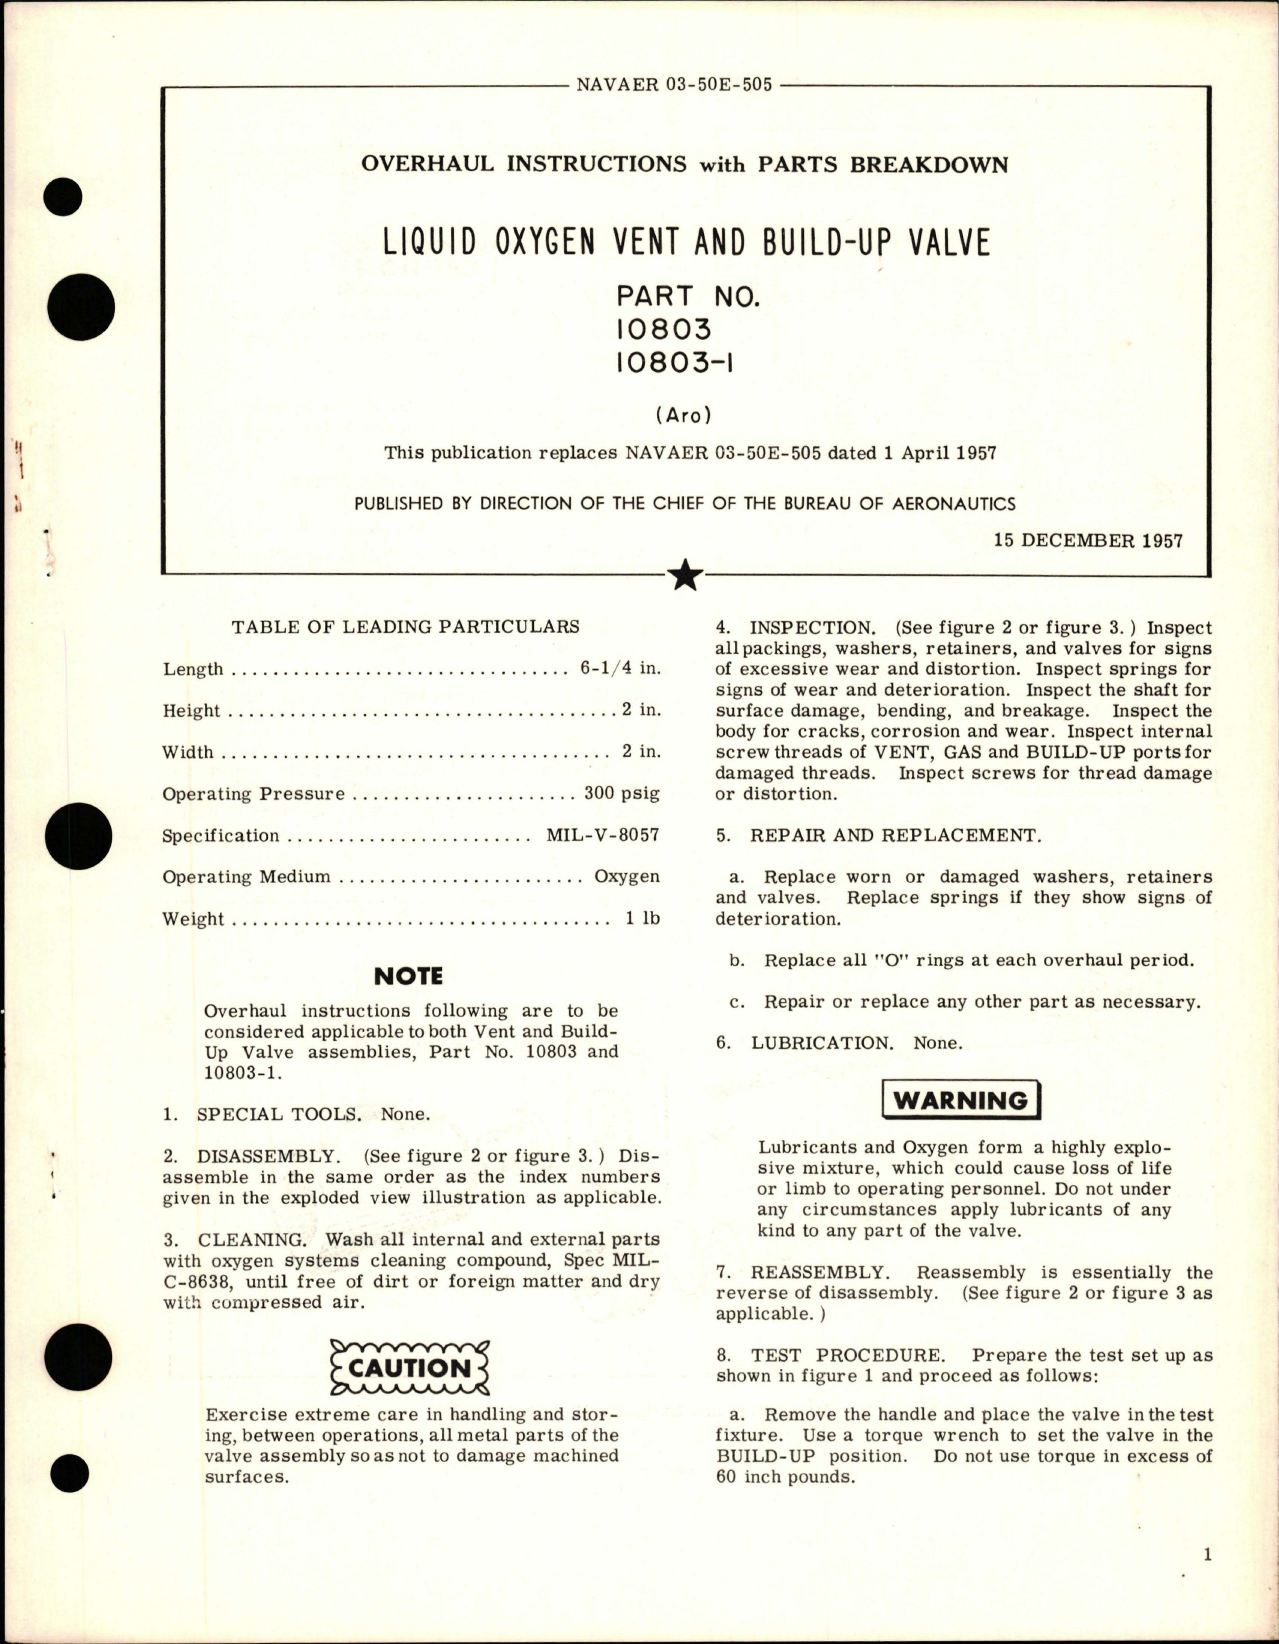 Sample page 1 from AirCorps Library document: Overhaul Instructions with Parts Breakdown for Liquid Oxygen Vent and Build-Up Valve - Parts 10803 and 10803-1